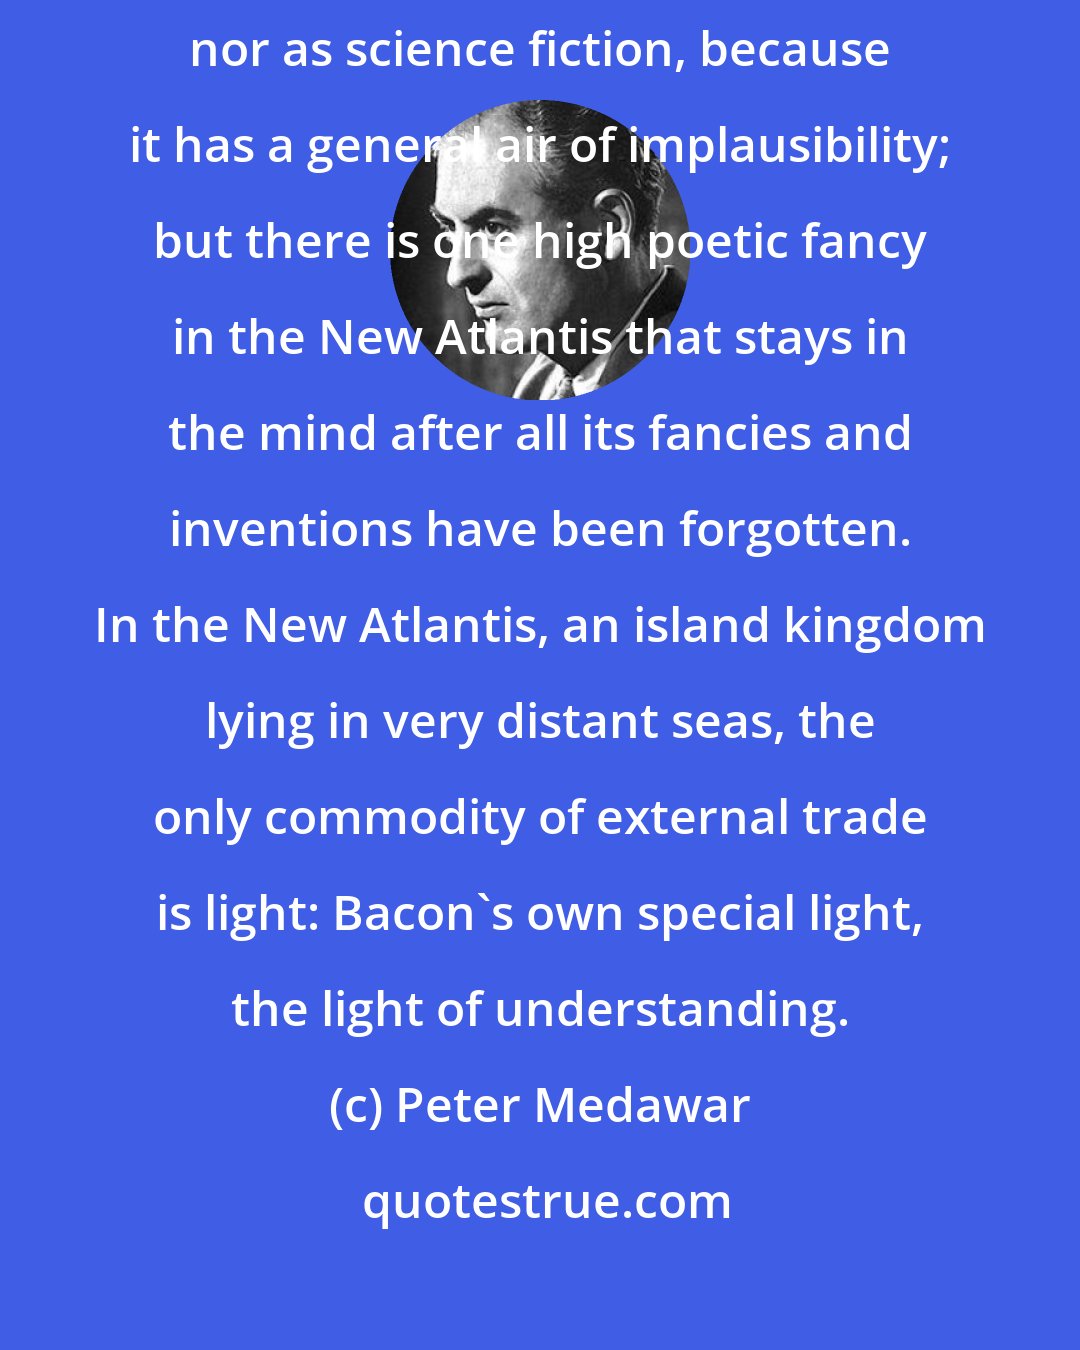 Peter Medawar: We shall not read it for its sociological insights, which are non-existent, nor as science fiction, because it has a general air of implausibility; but there is one high poetic fancy in the New Atlantis that stays in the mind after all its fancies and inventions have been forgotten. In the New Atlantis, an island kingdom lying in very distant seas, the only commodity of external trade is light: Bacon's own special light, the light of understanding.